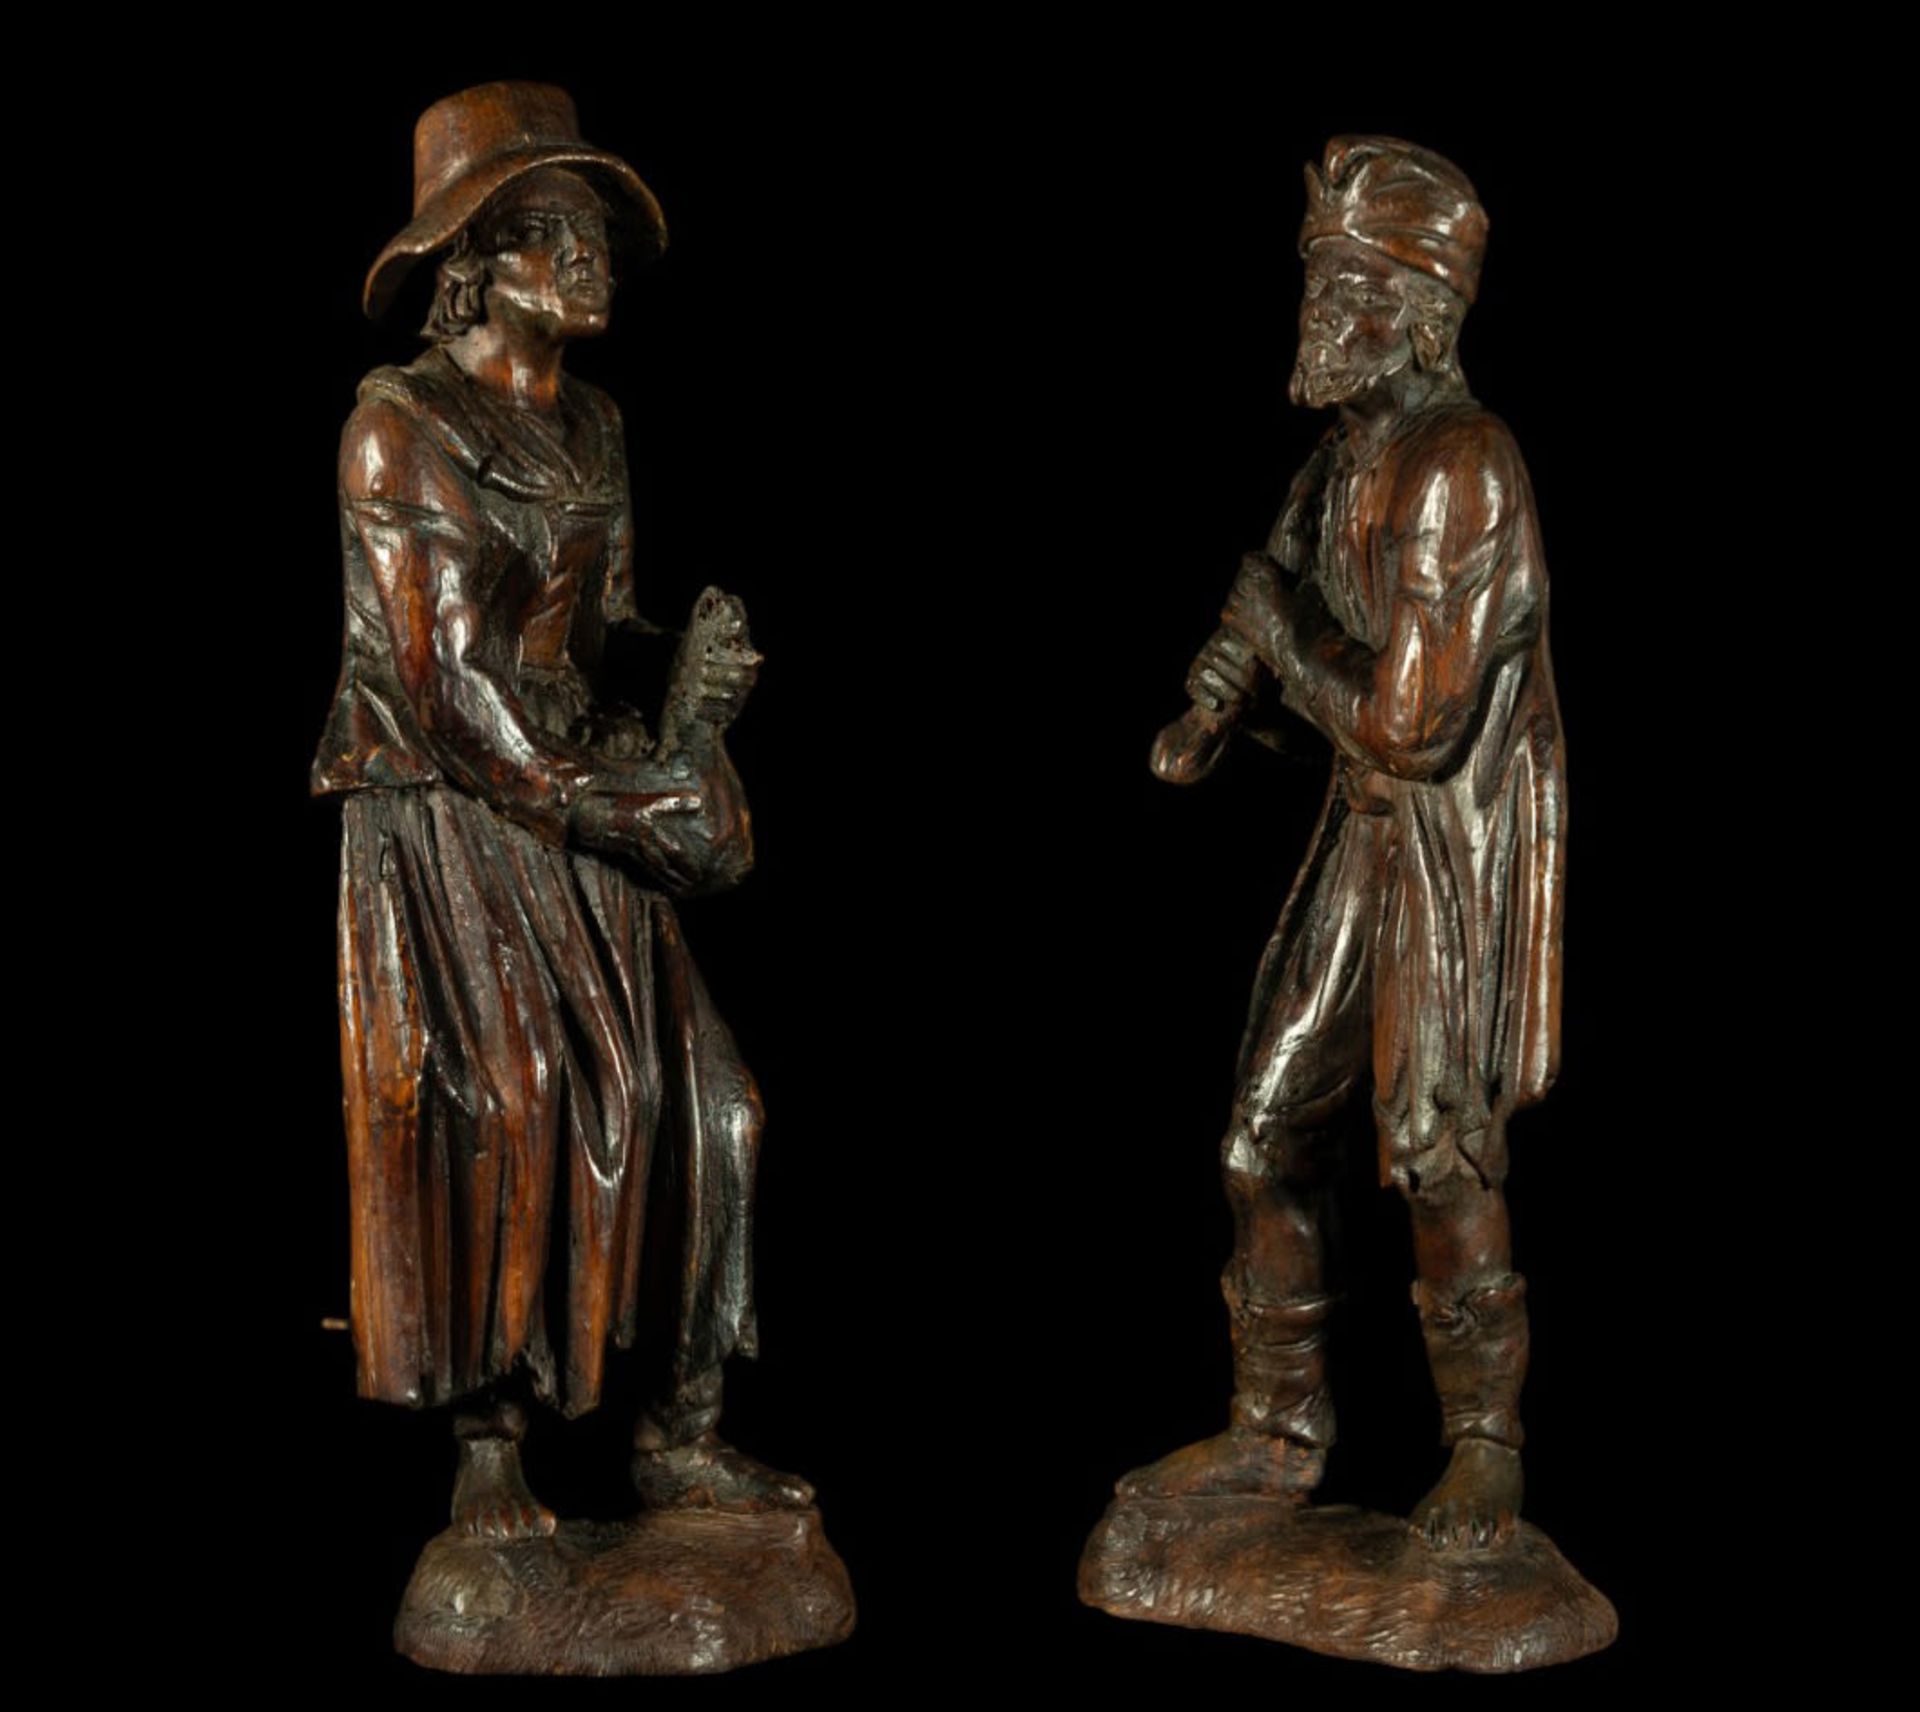 Rare pair of 18th century German Black Forest Beggars, Simon Trojer (manner of) - Image 5 of 5